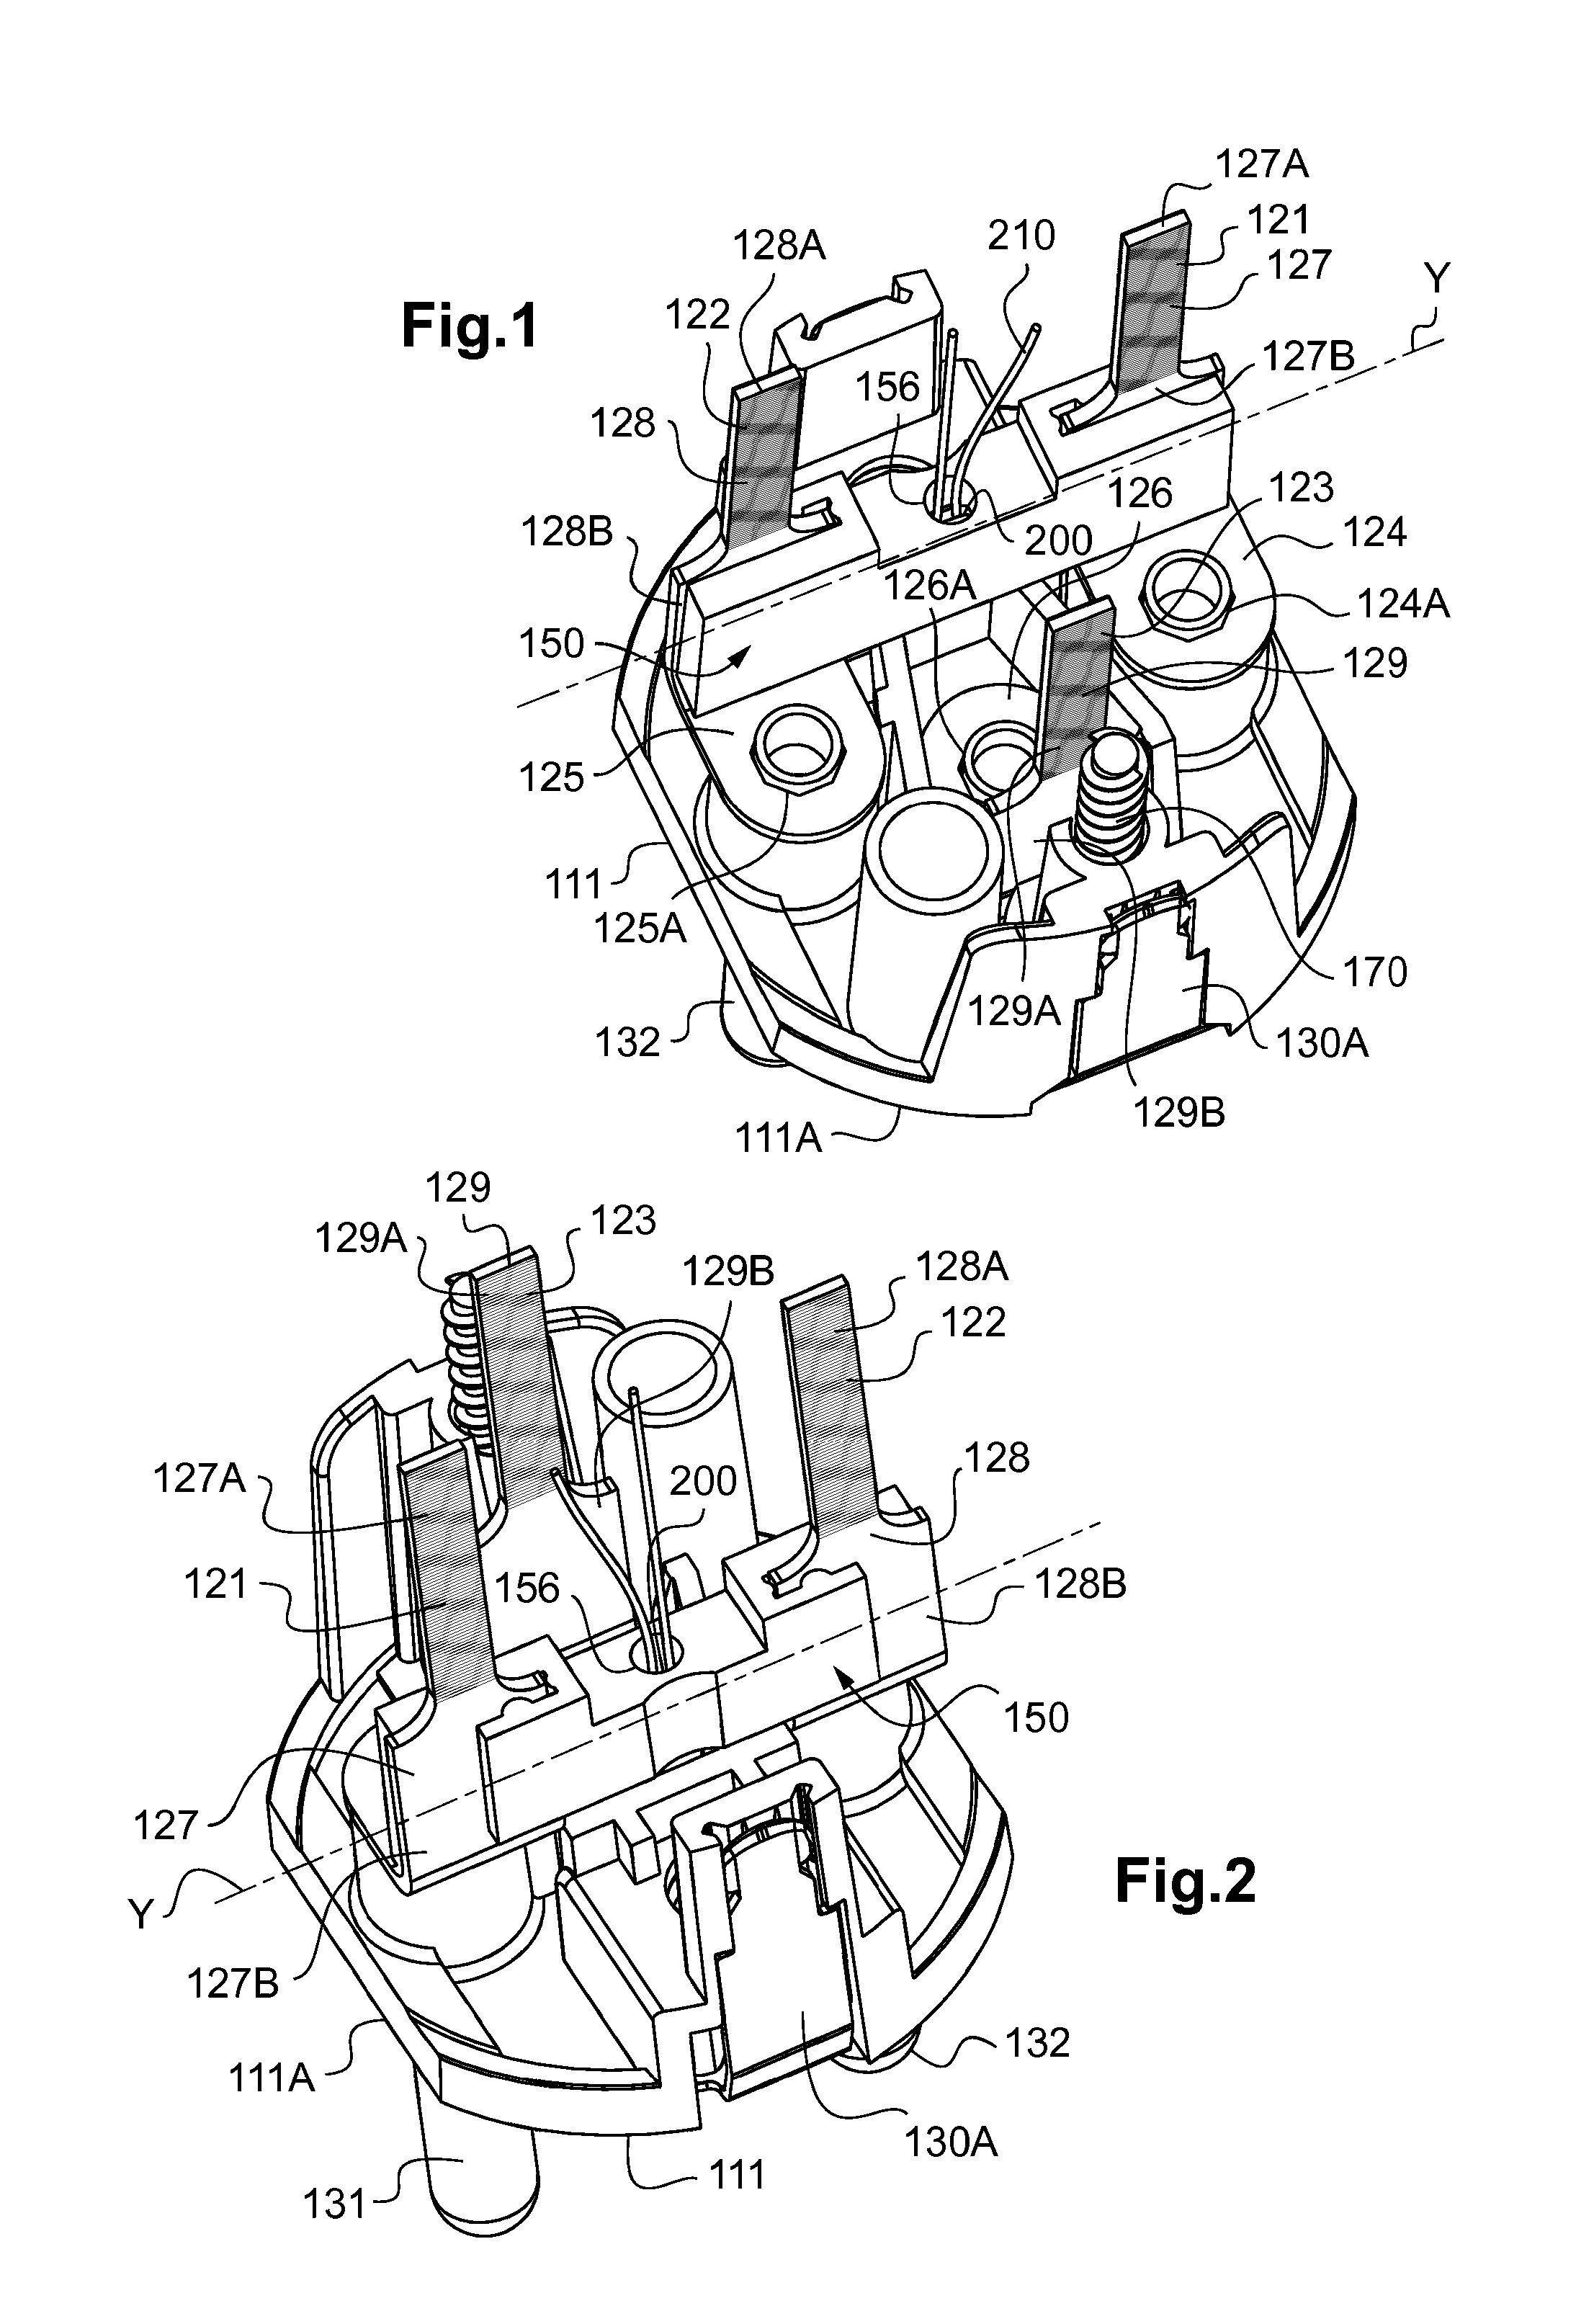 Electrical apparatus comprising a temperature sensor housed in a support element